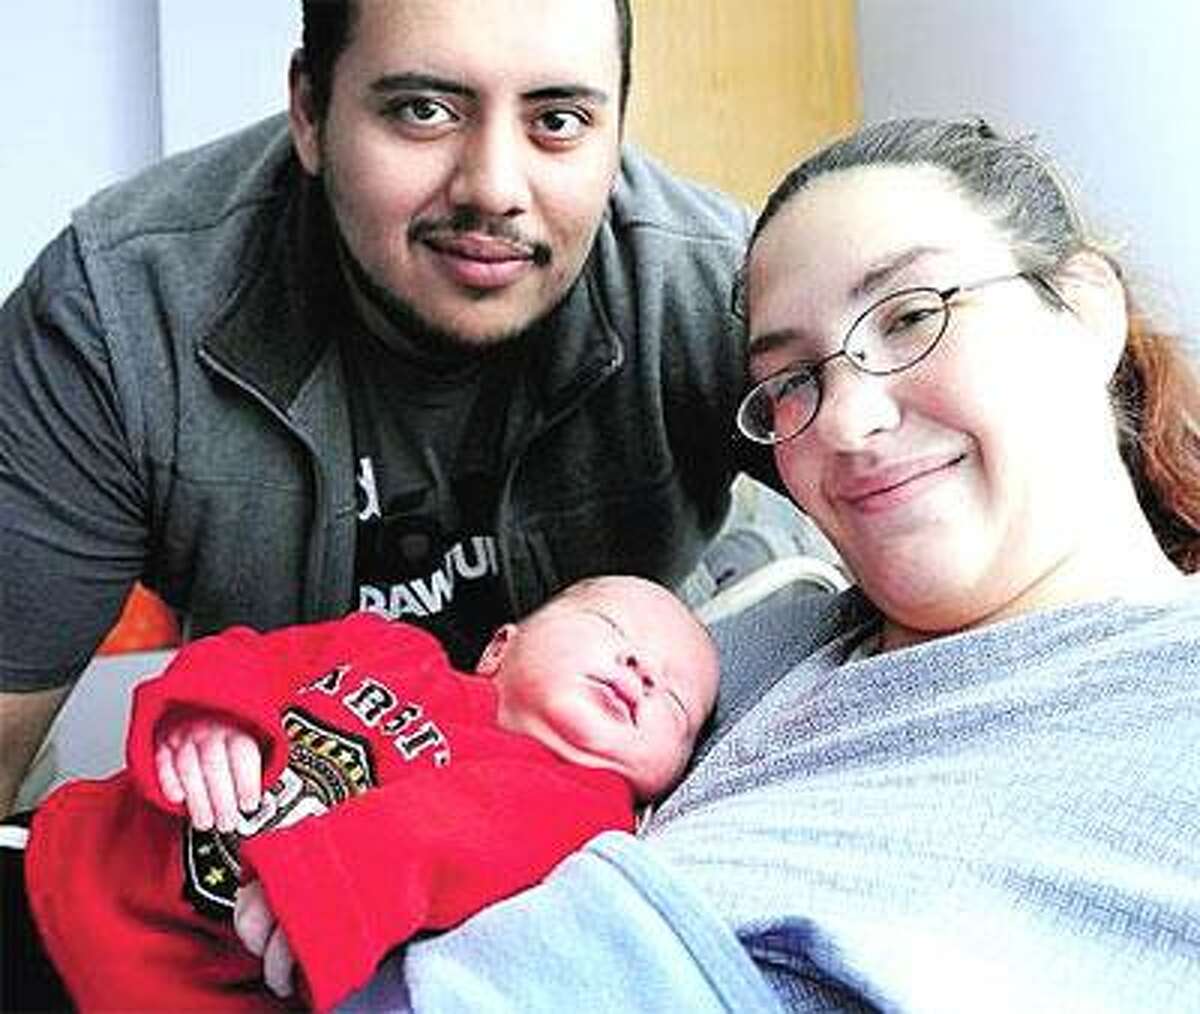 Emanuel Velez, top, and Heather Lafogg show off their newborn son, Angel Velez, who was born at 2:03 a.m. Saturday at the Hospital of Saint Raphael in New Haven. (Arnold Gold/Register)